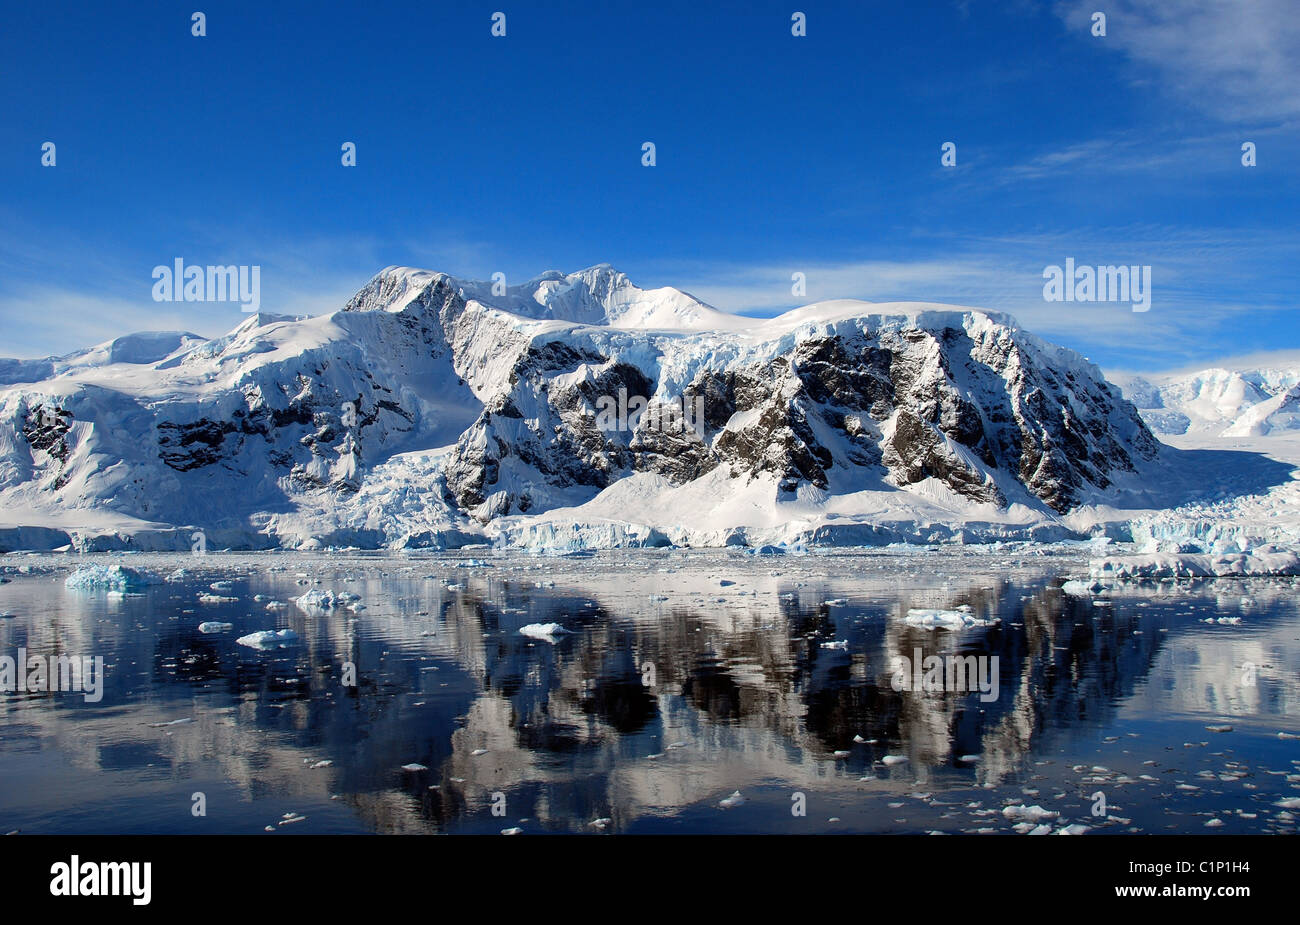 crystal clear reflection of antarctic landscape in the water Stock Photo